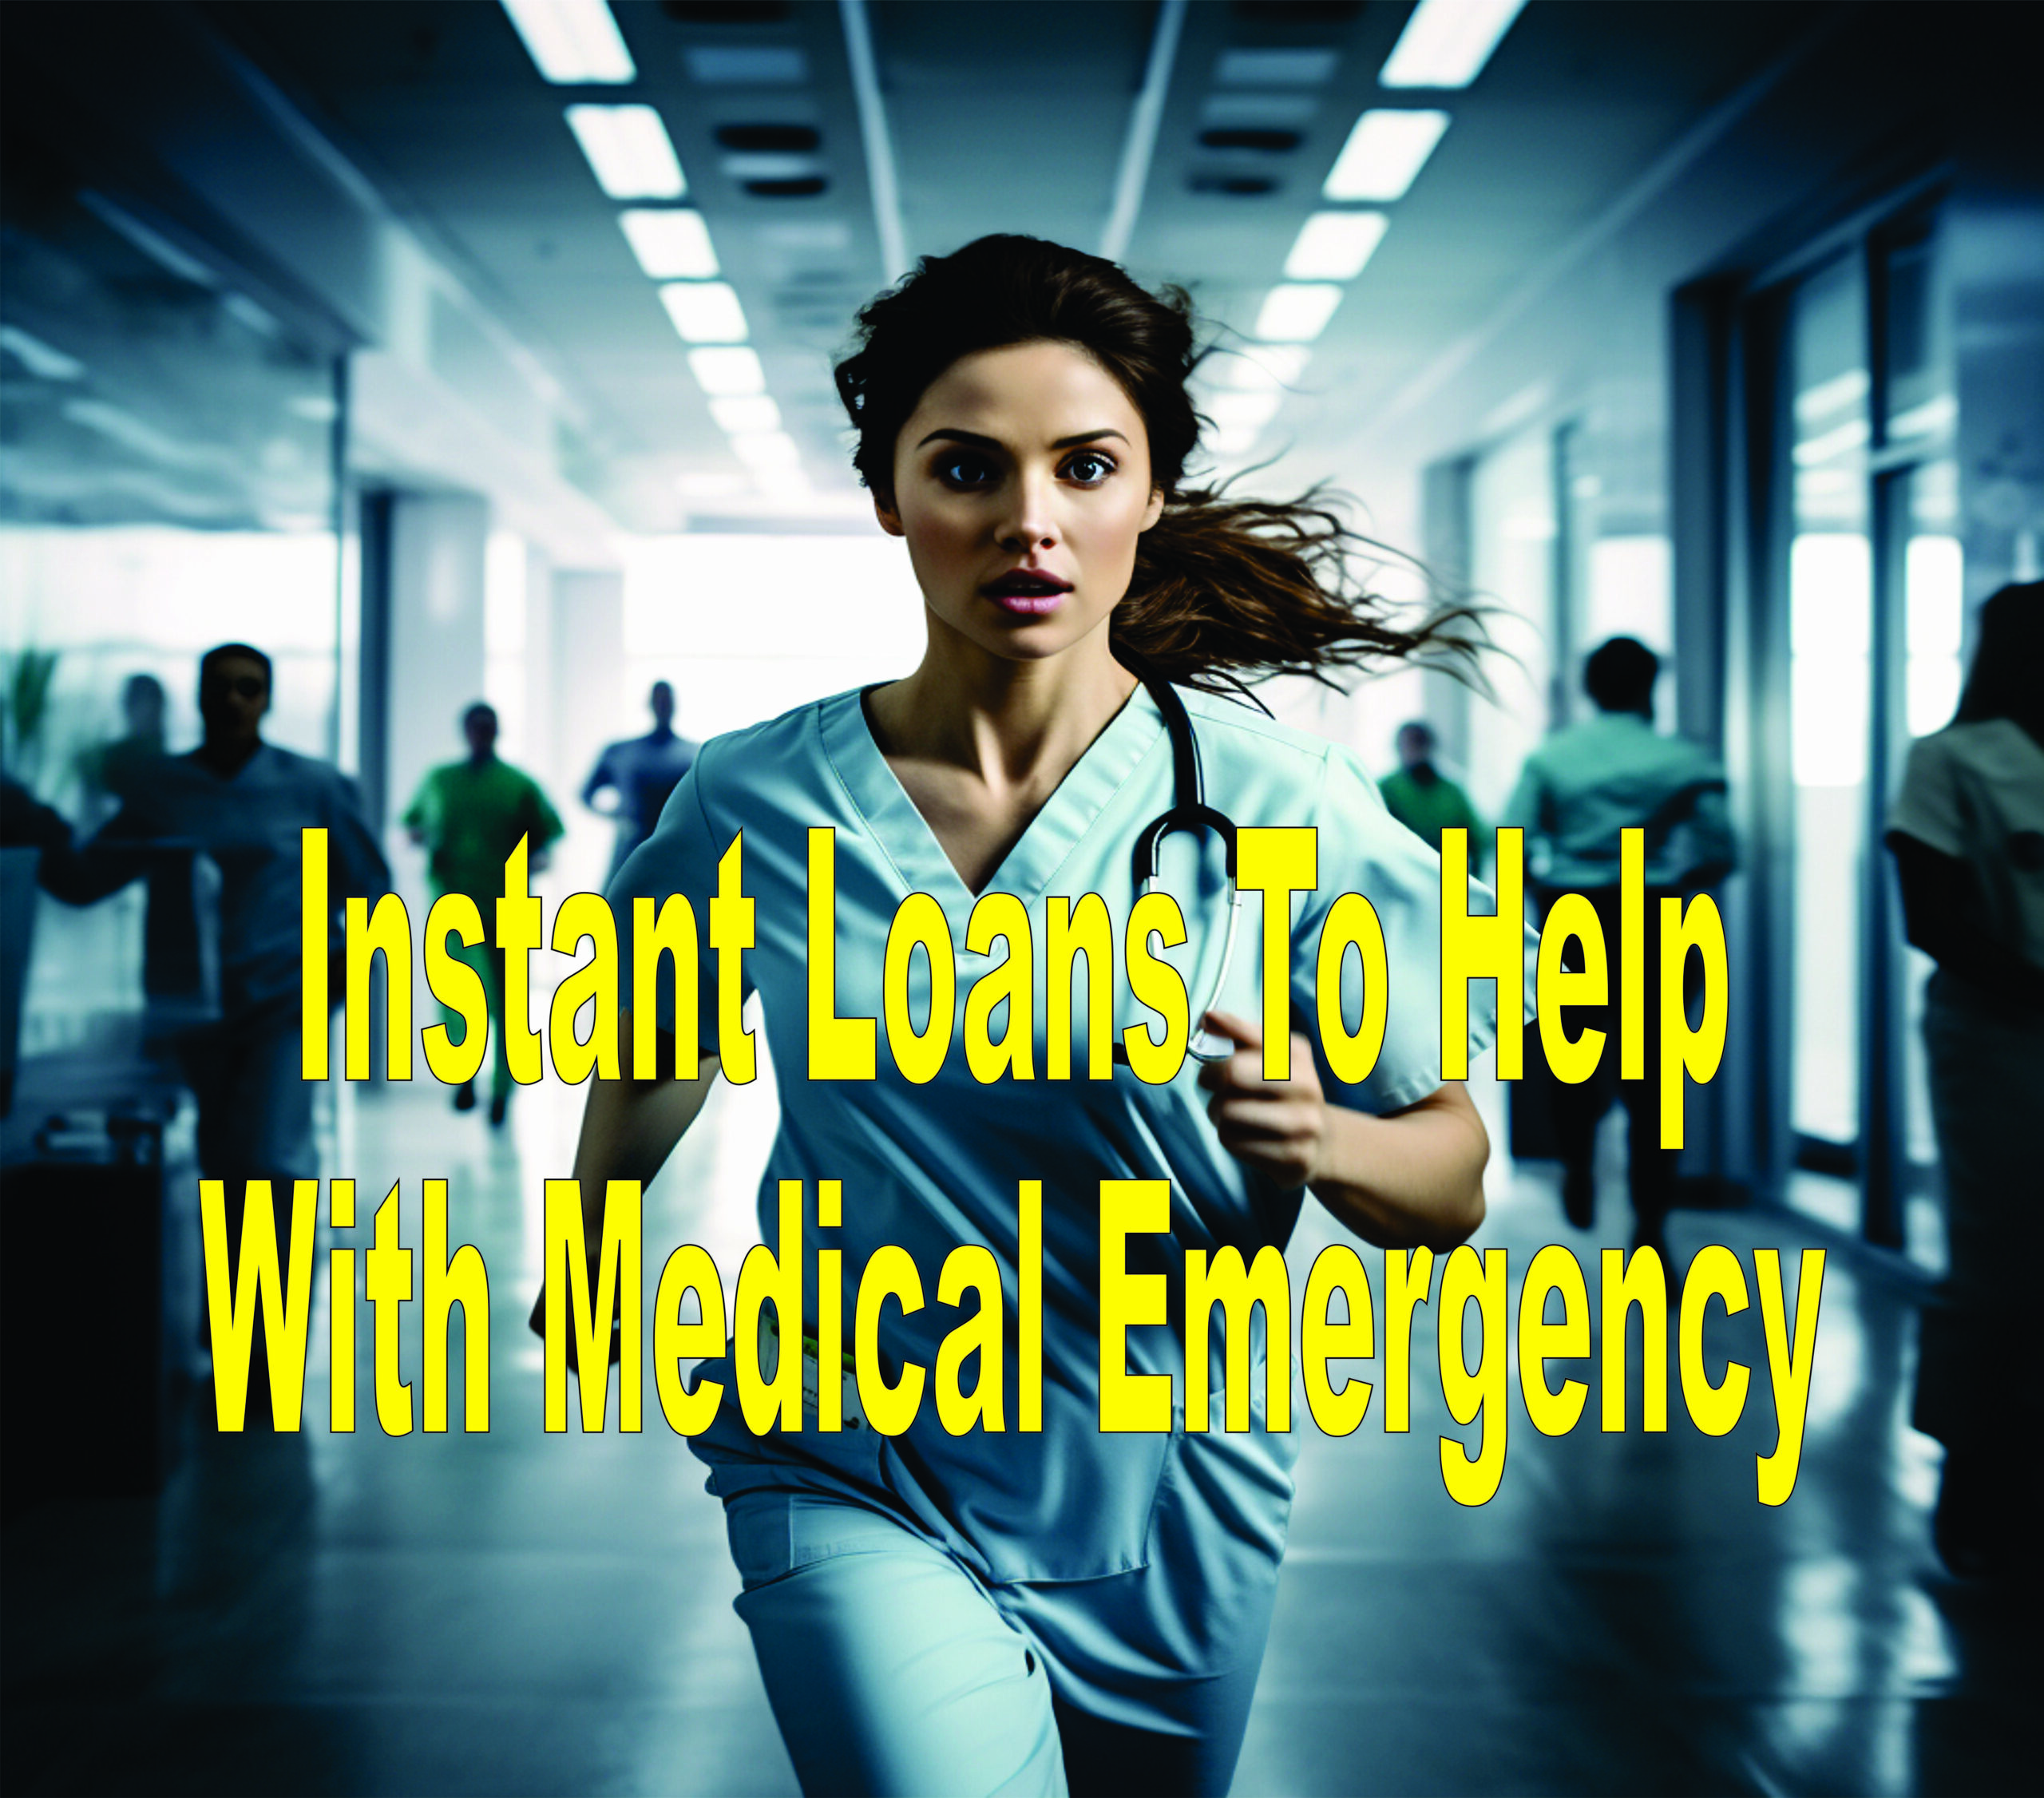 Instant Loans To Help With Medical Emergency